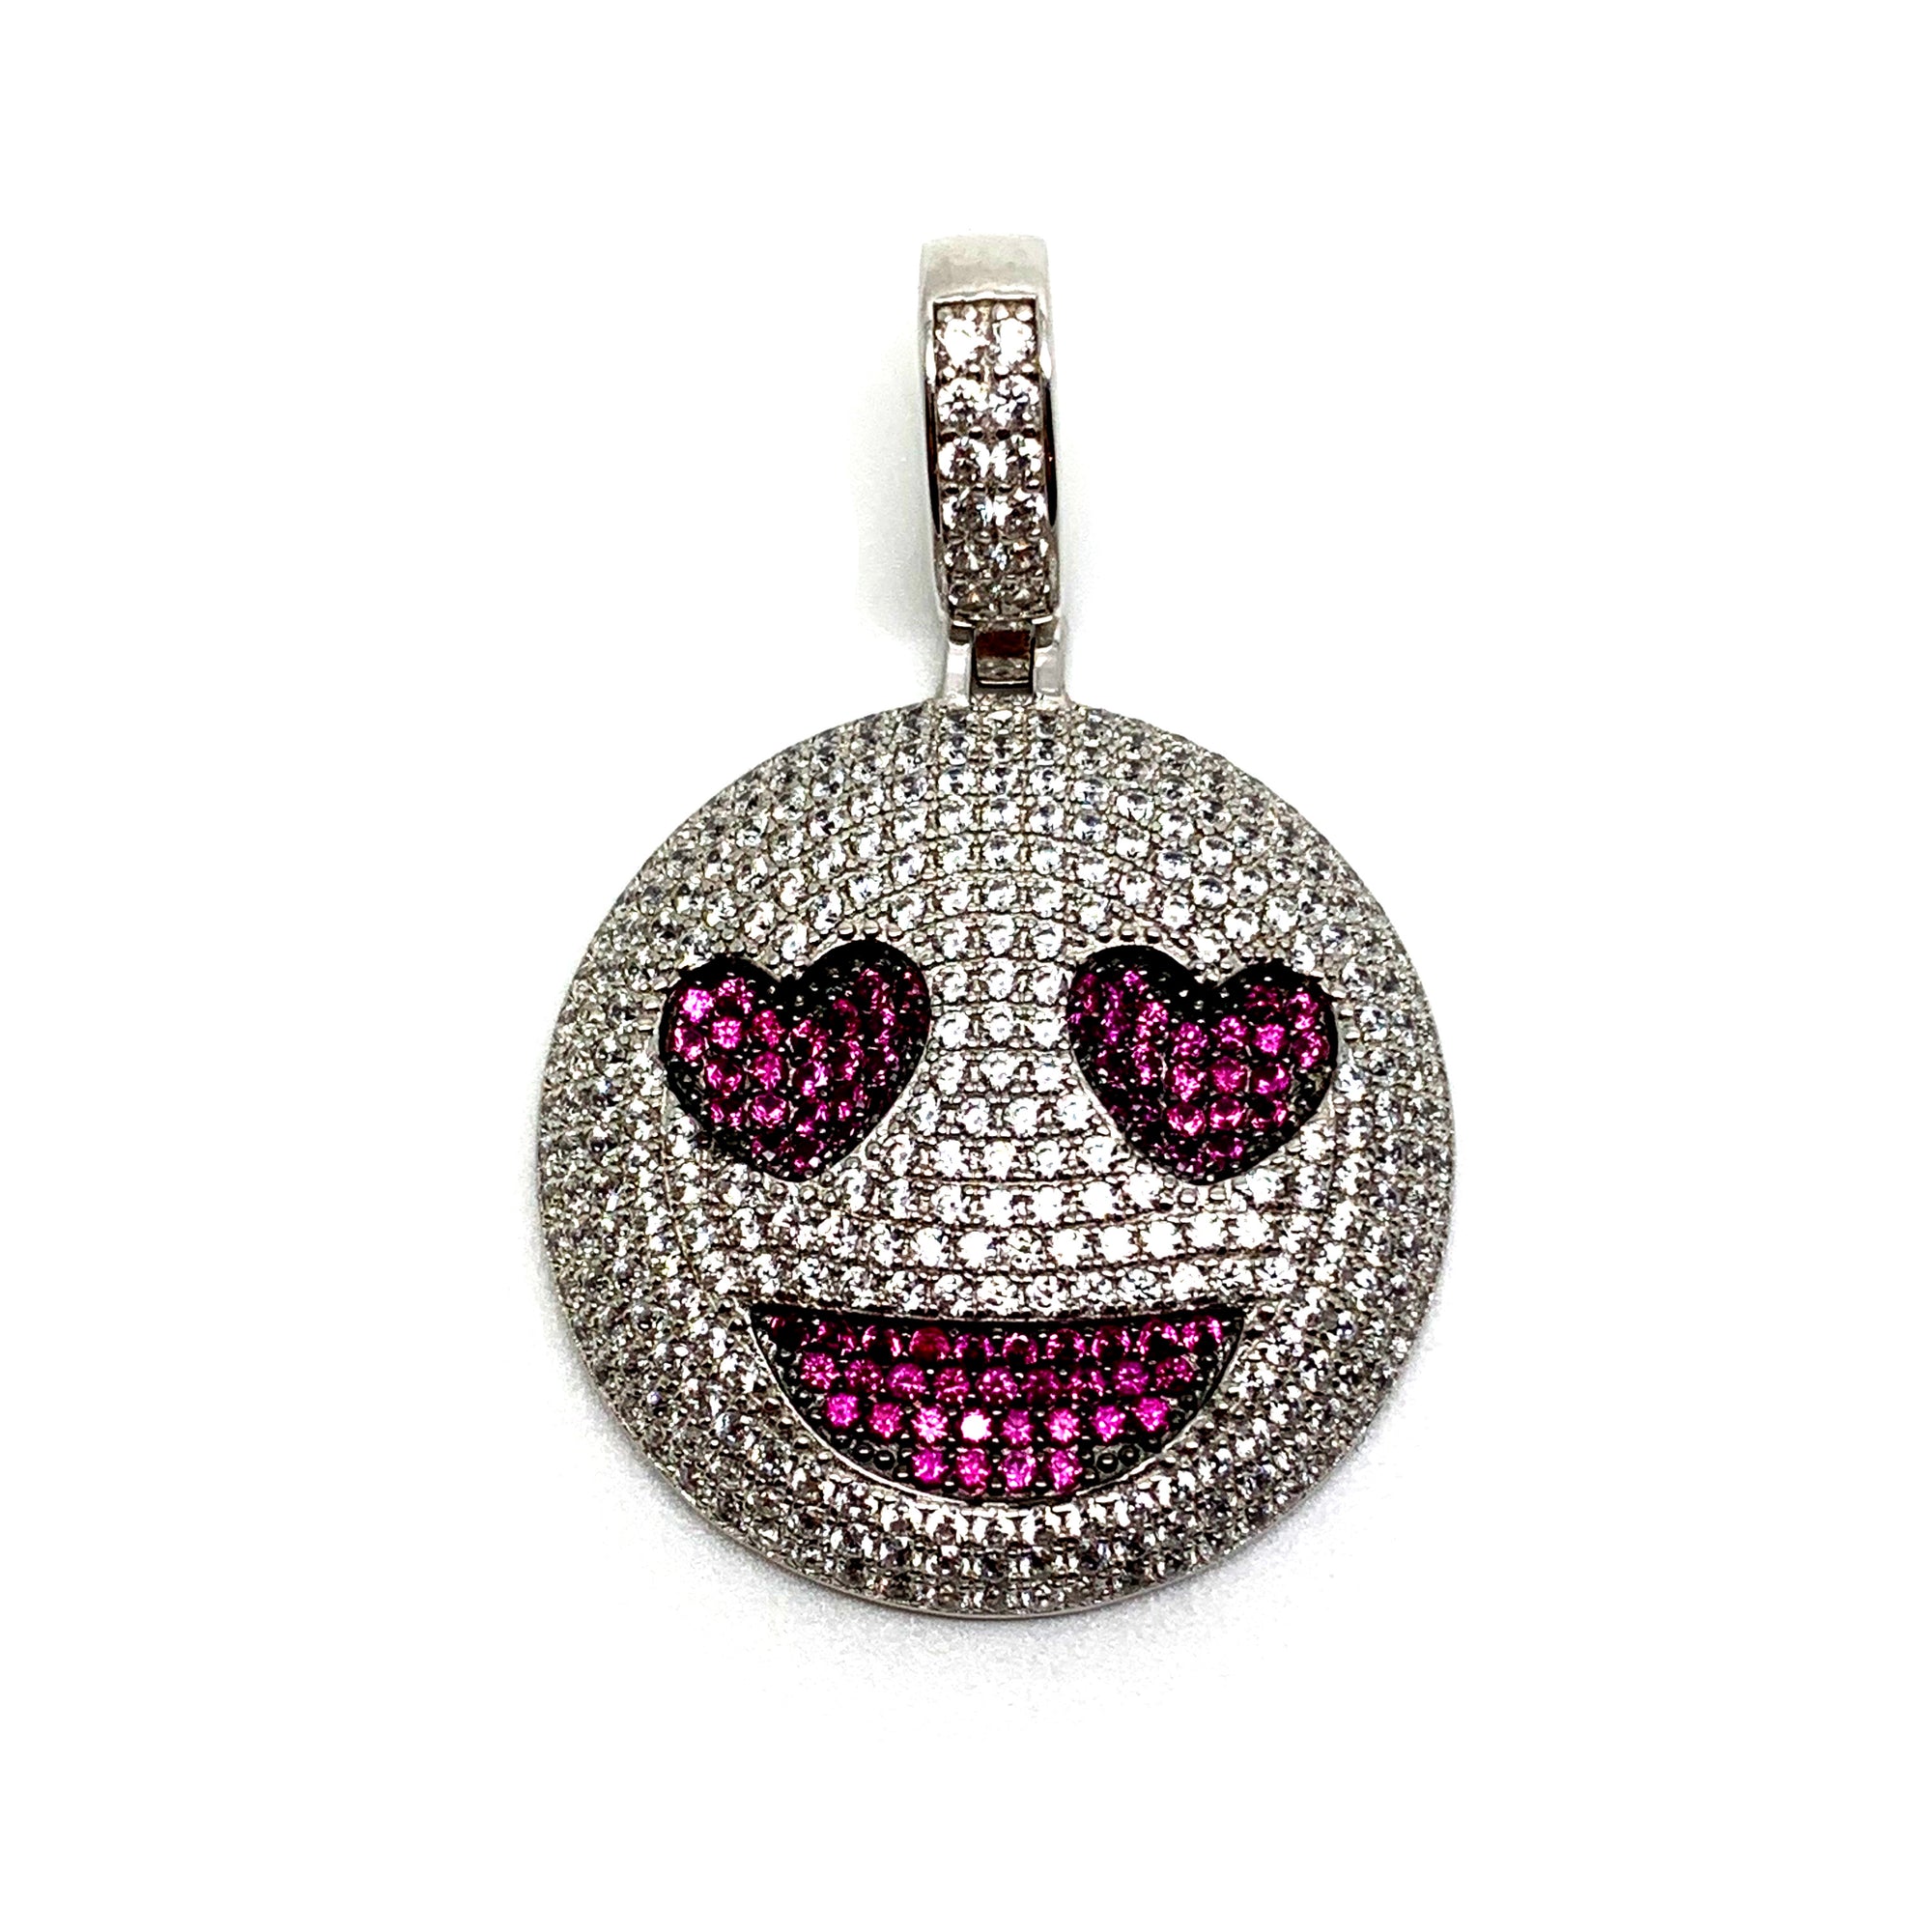 Iced Grinning Face with Heart Eyes Emoji Pendant 